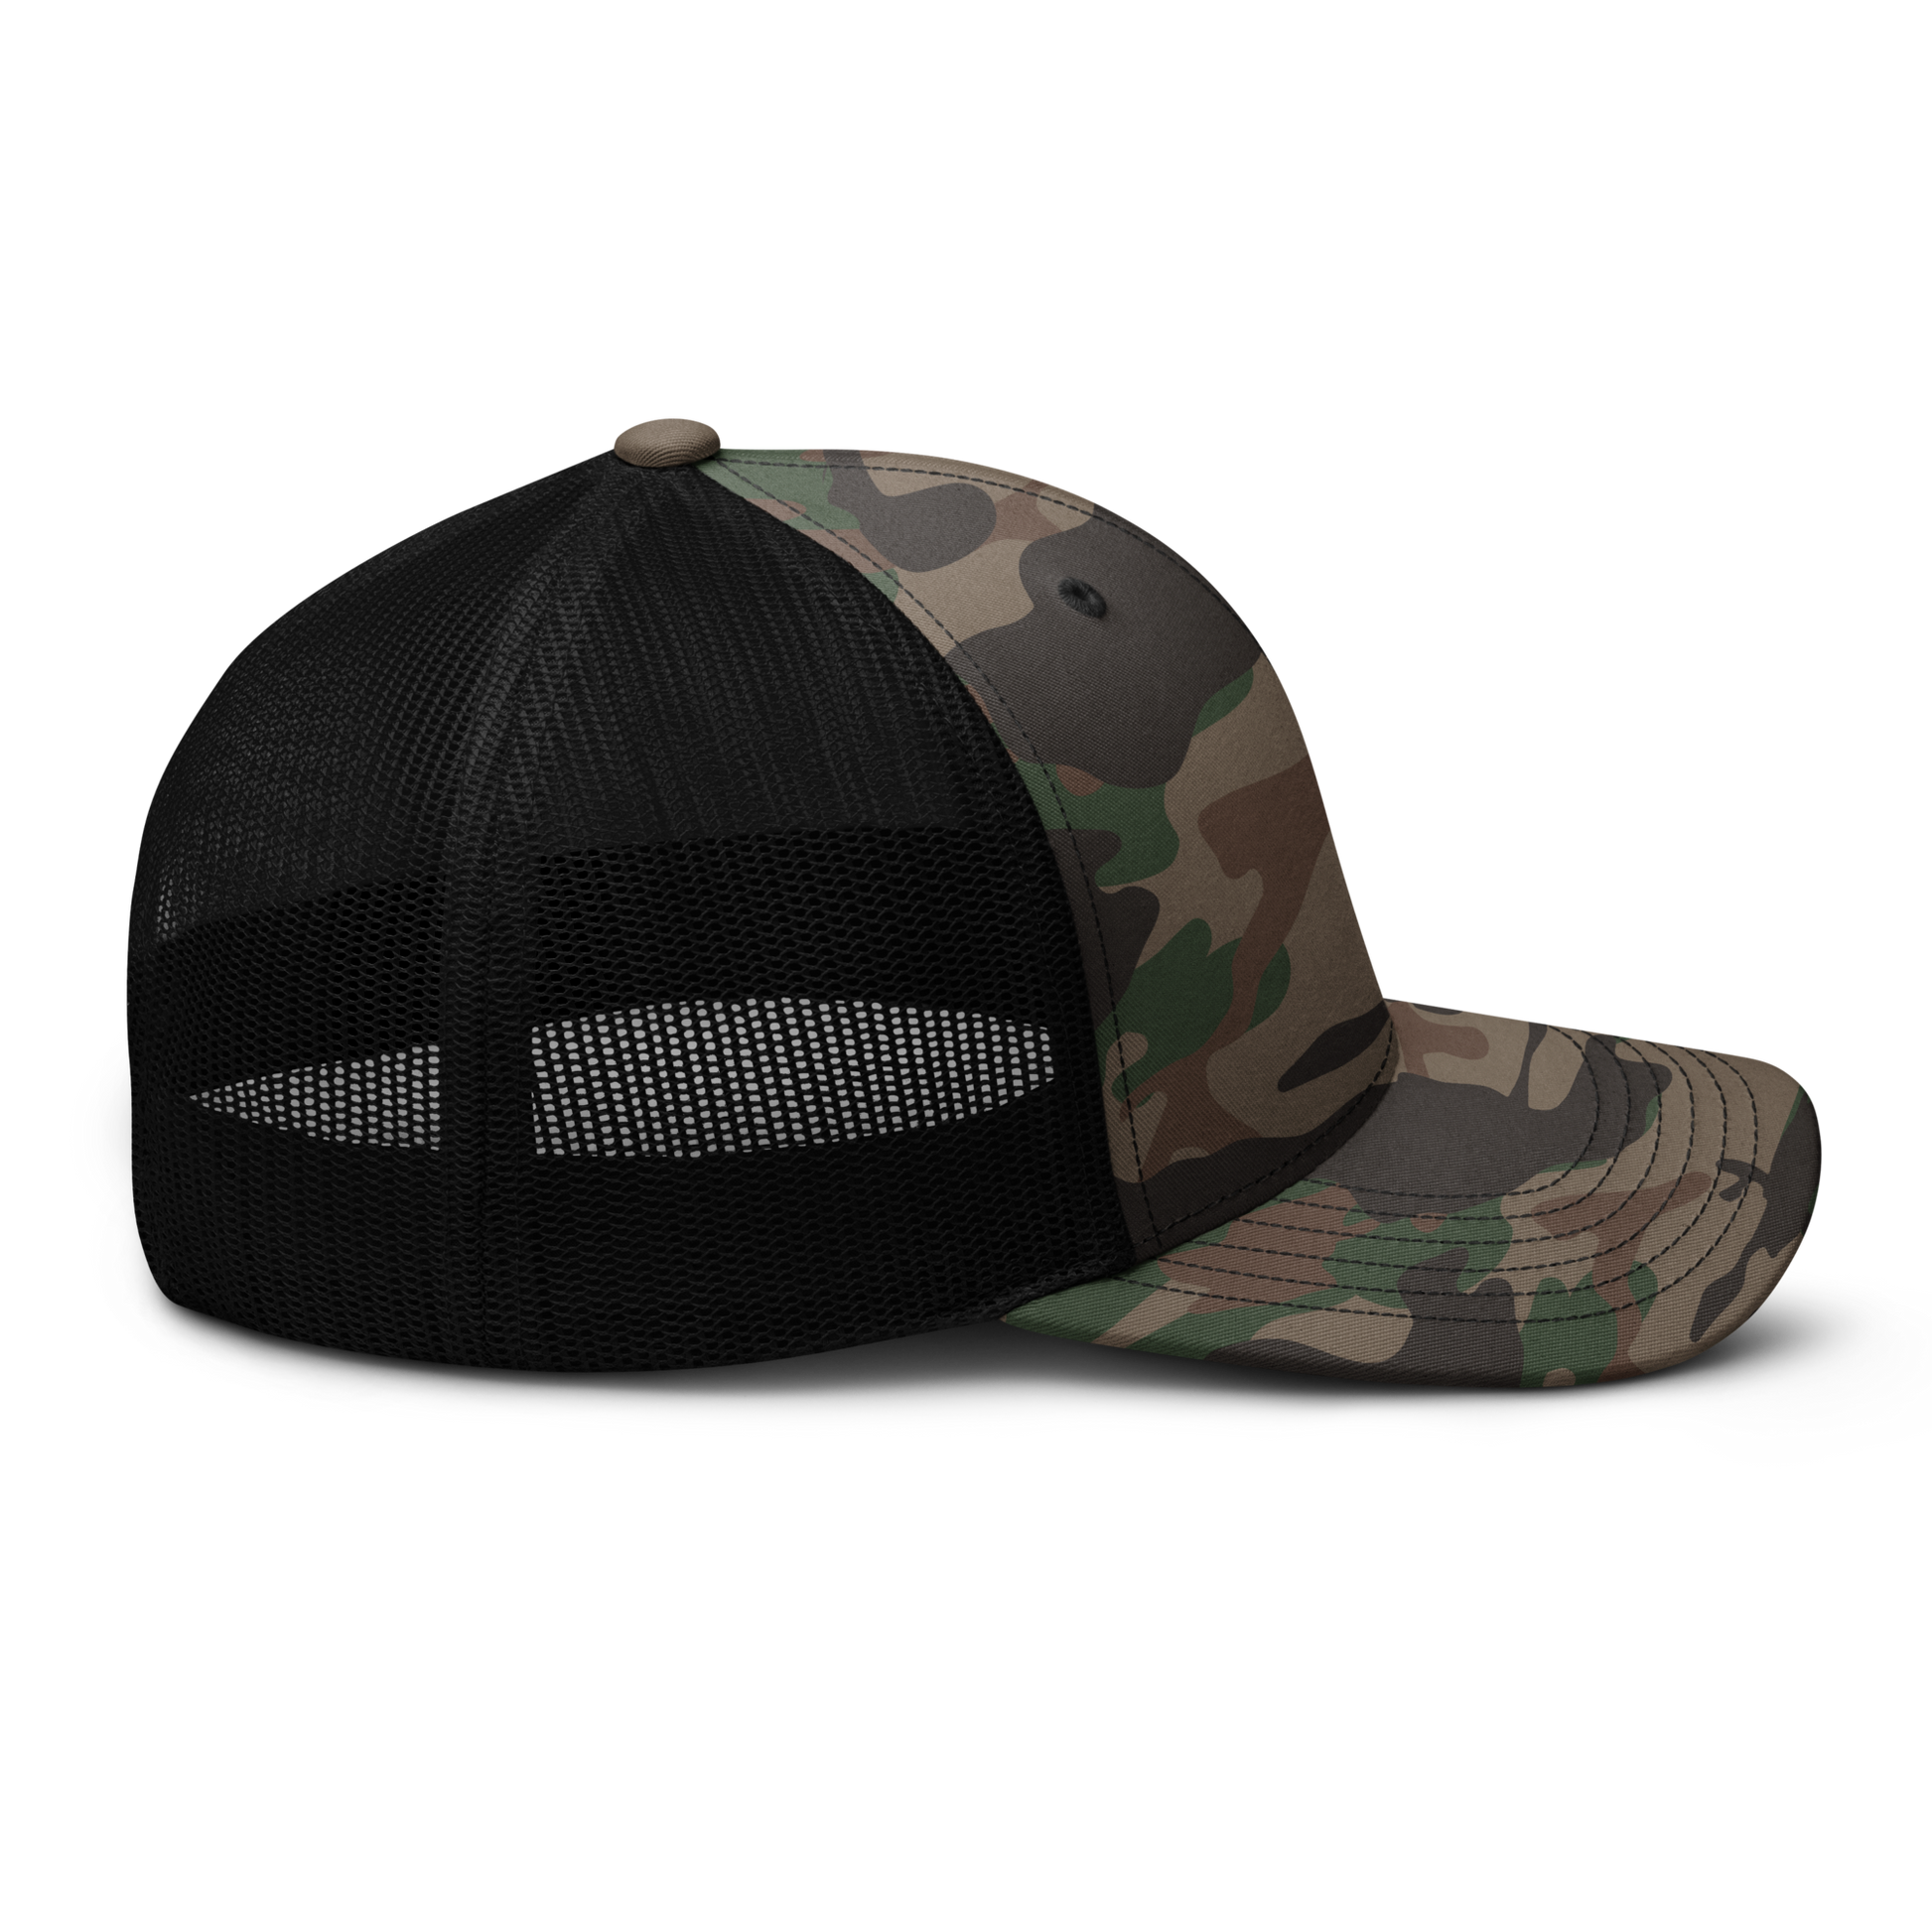 FusionTech Redneck Hillbilly Kiss My Bass Black/Camo Camouflage Fishing Cap #1 Cap920 Hat, adult Unisex, Size: One Size